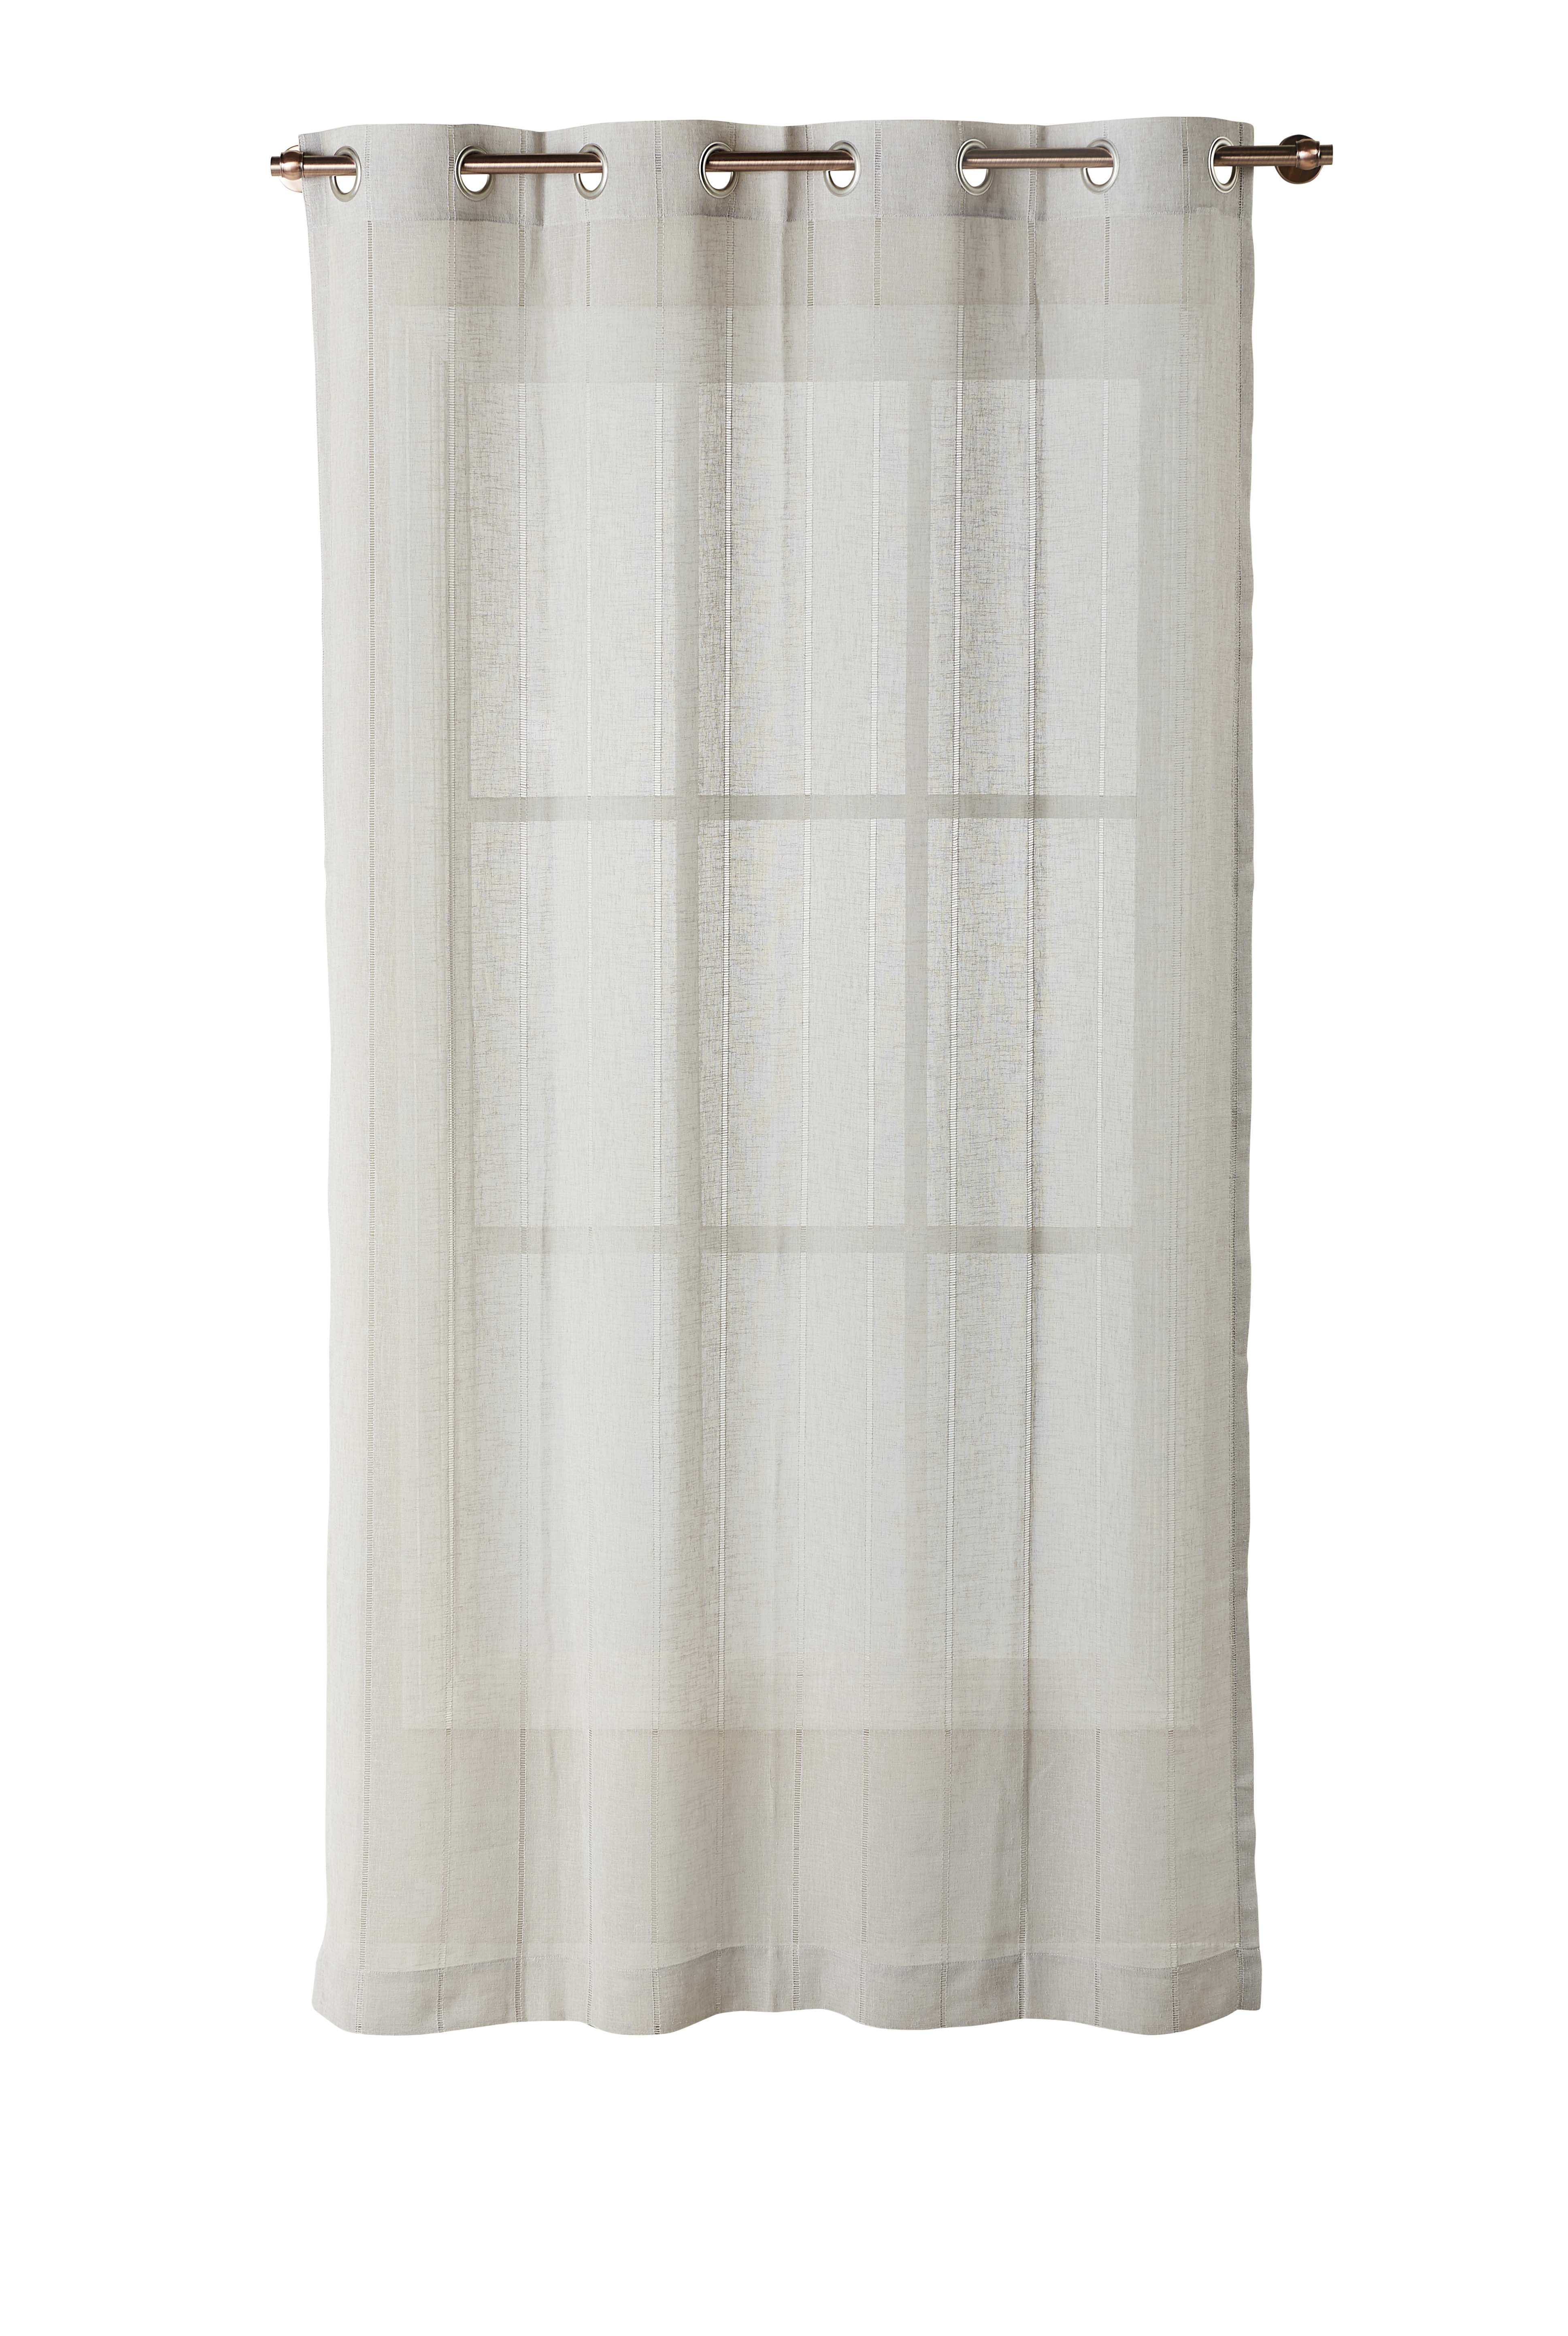 Better Home & Gardens Hemstitch Sheer Curtain Panel with Grommets ...